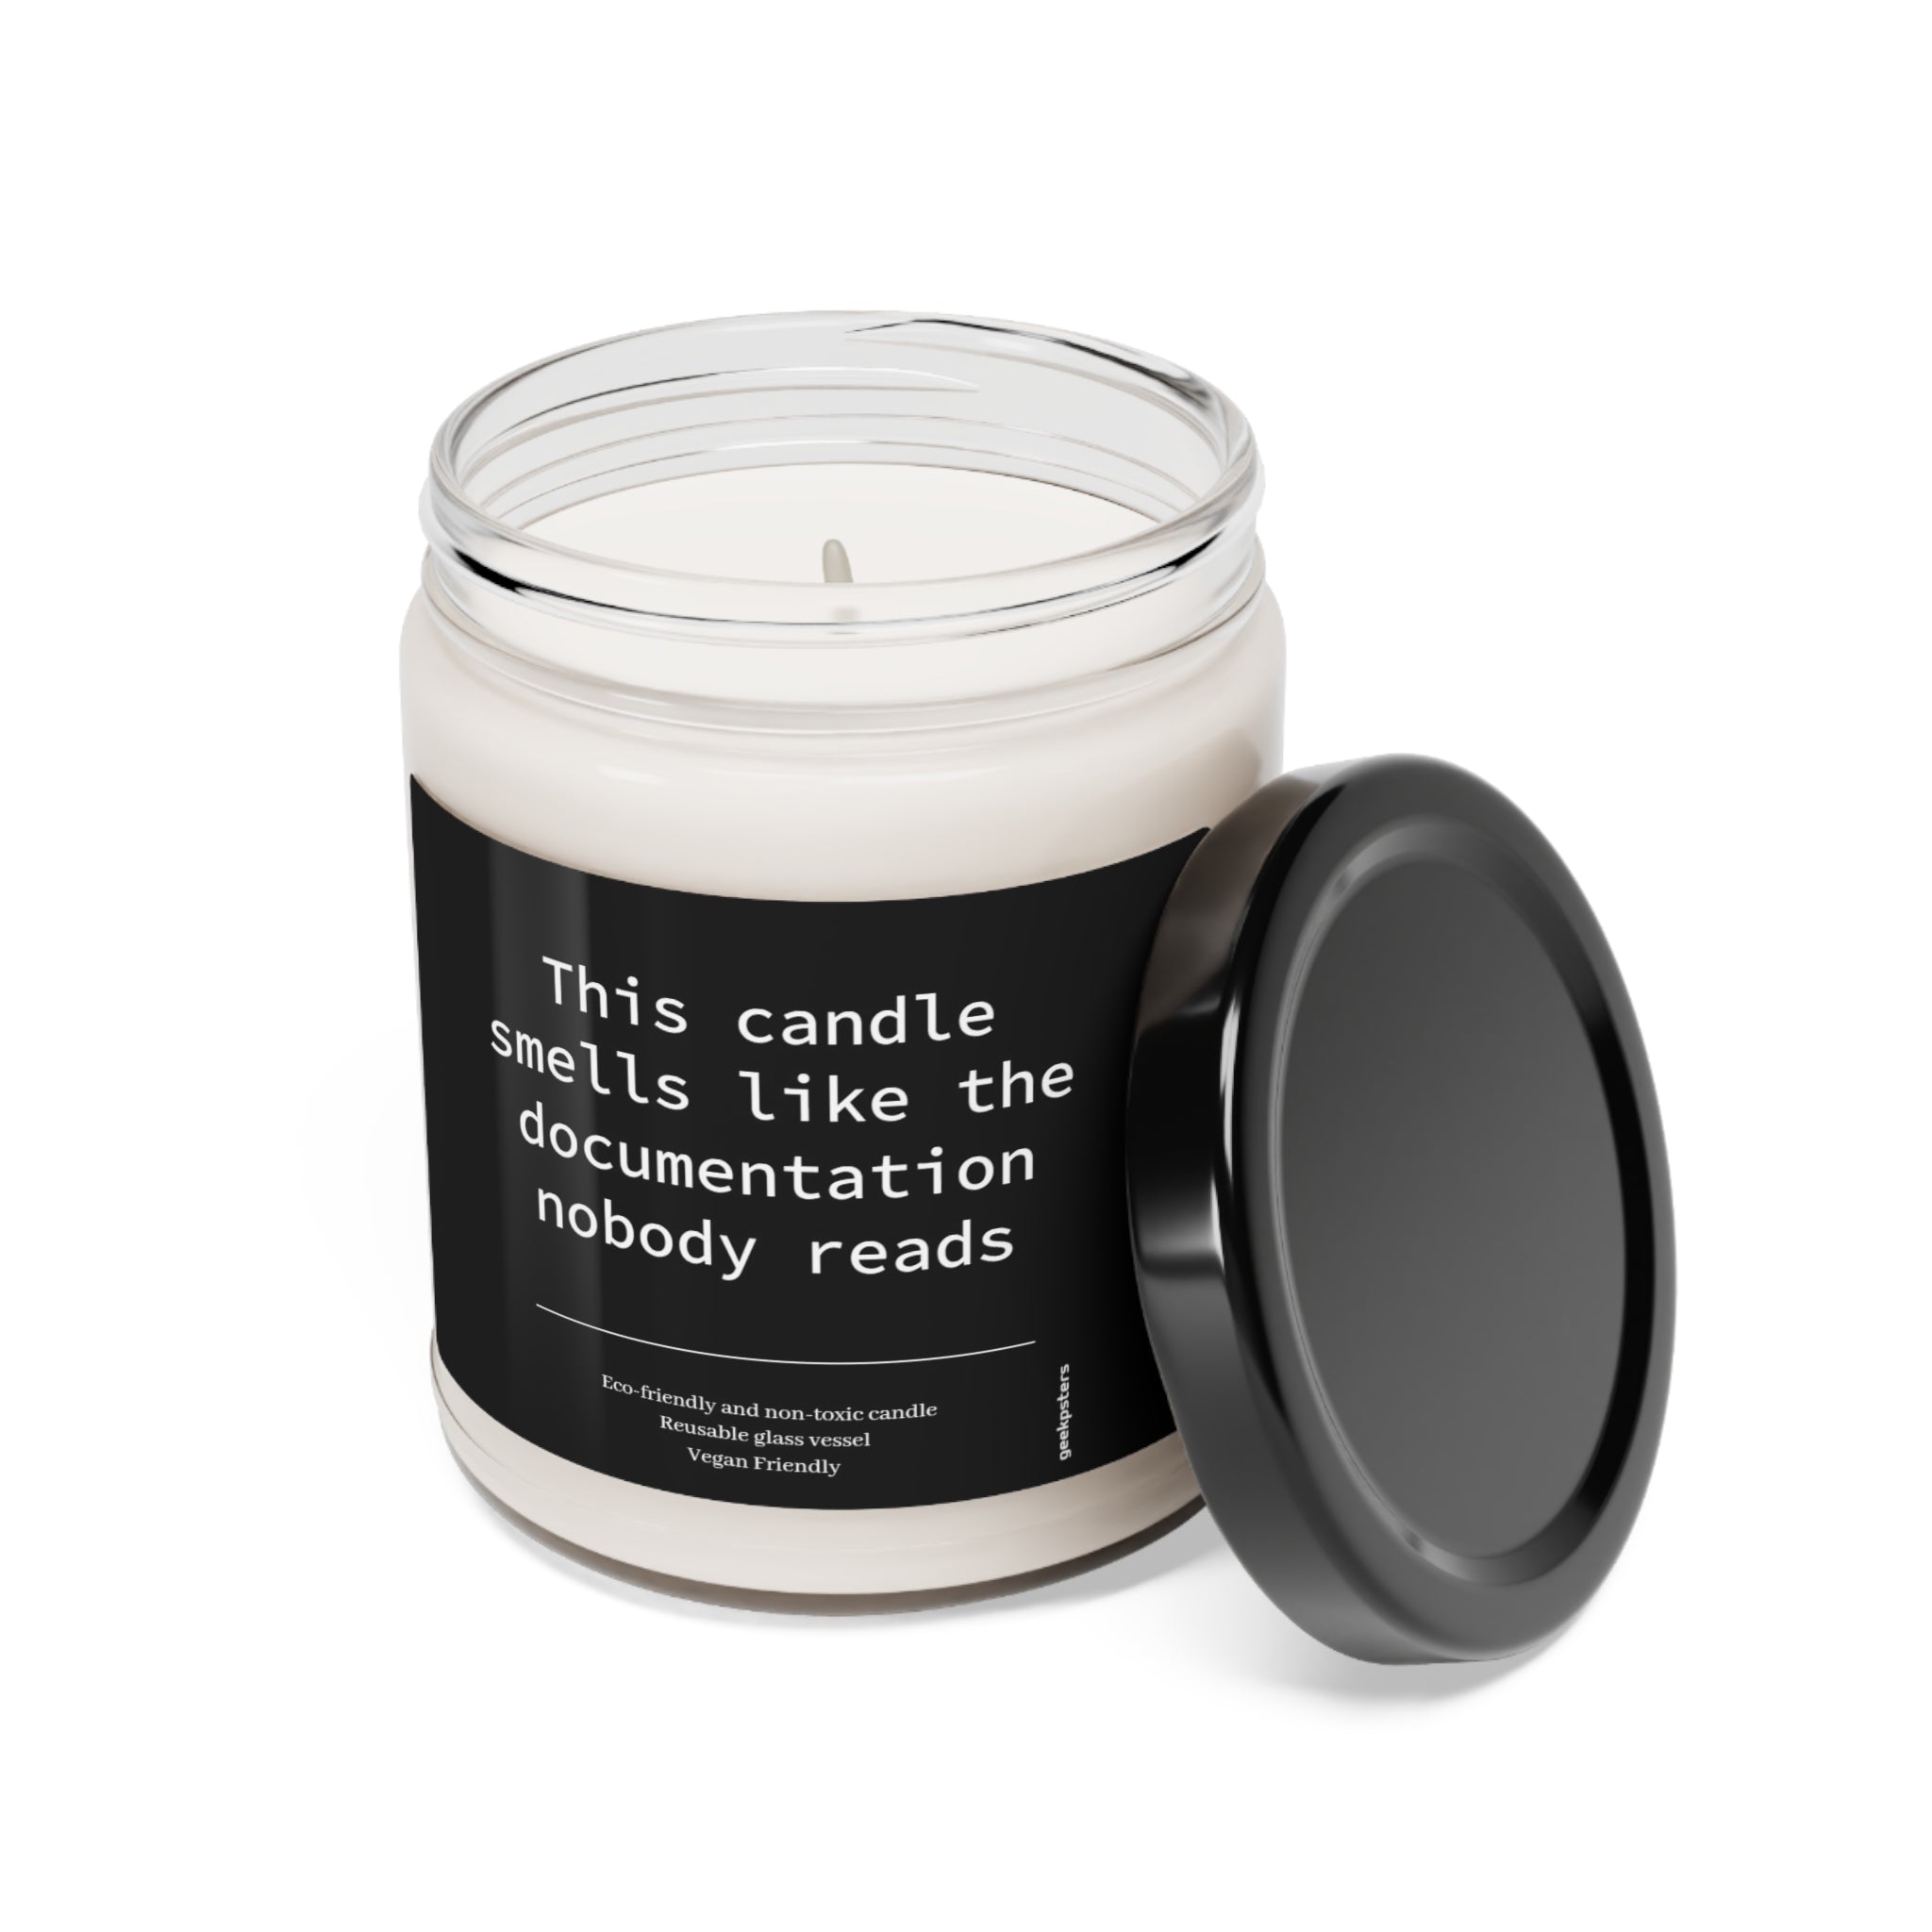 A natural soy wax scented candle with a humorous label stating "This Candle Smells Like the Documentation Nobody Reads